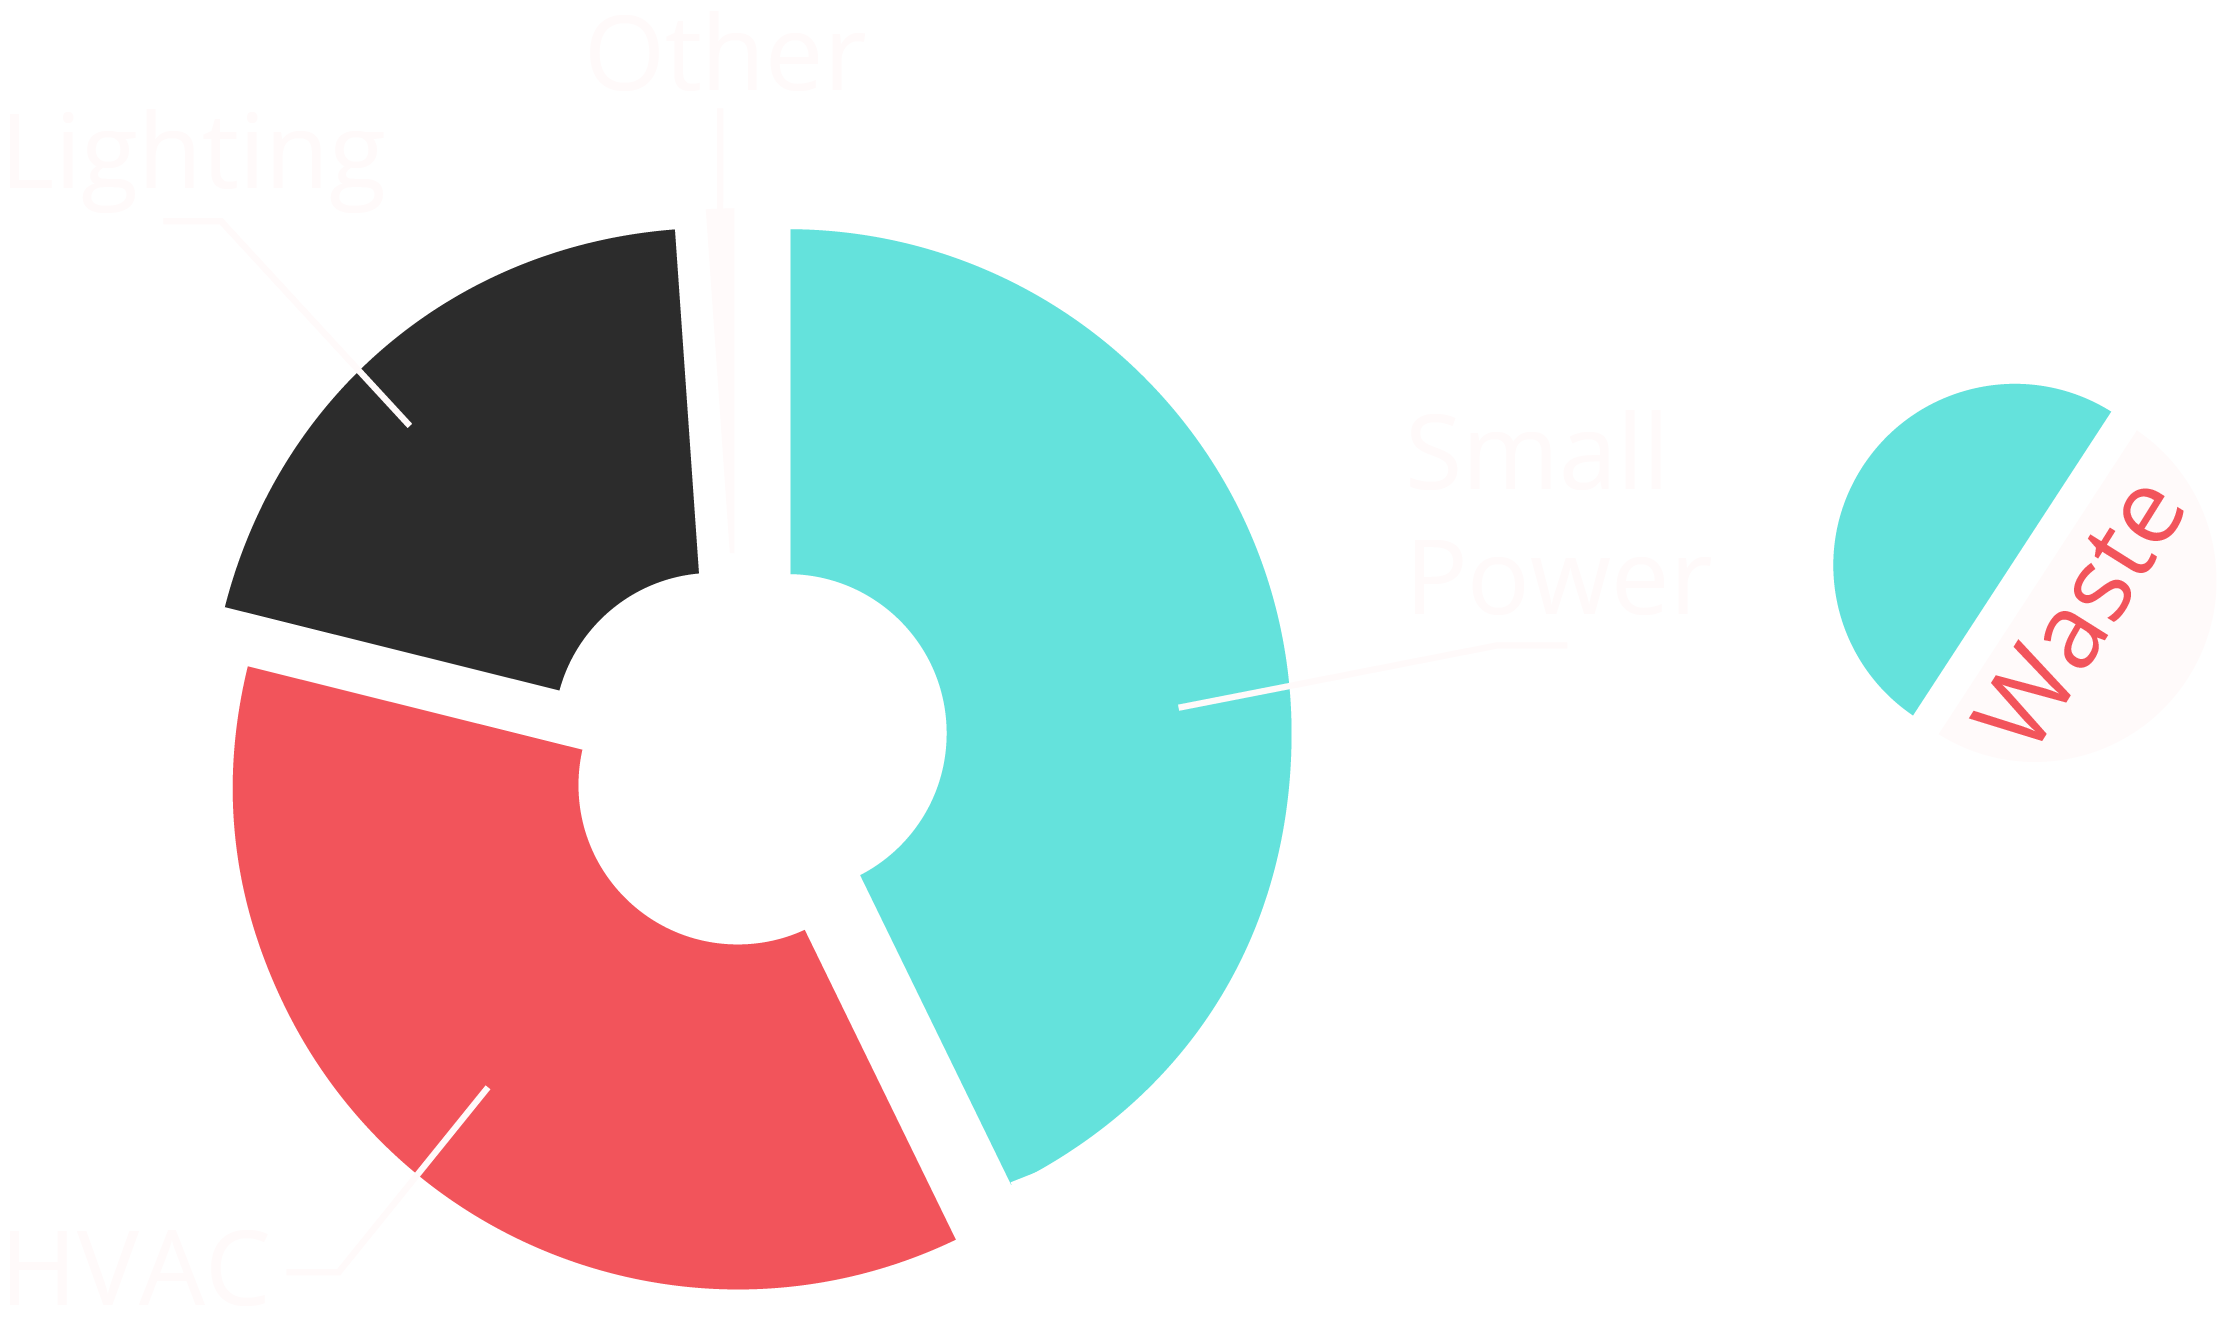 Wasted SP energy - doughnut chart with labels